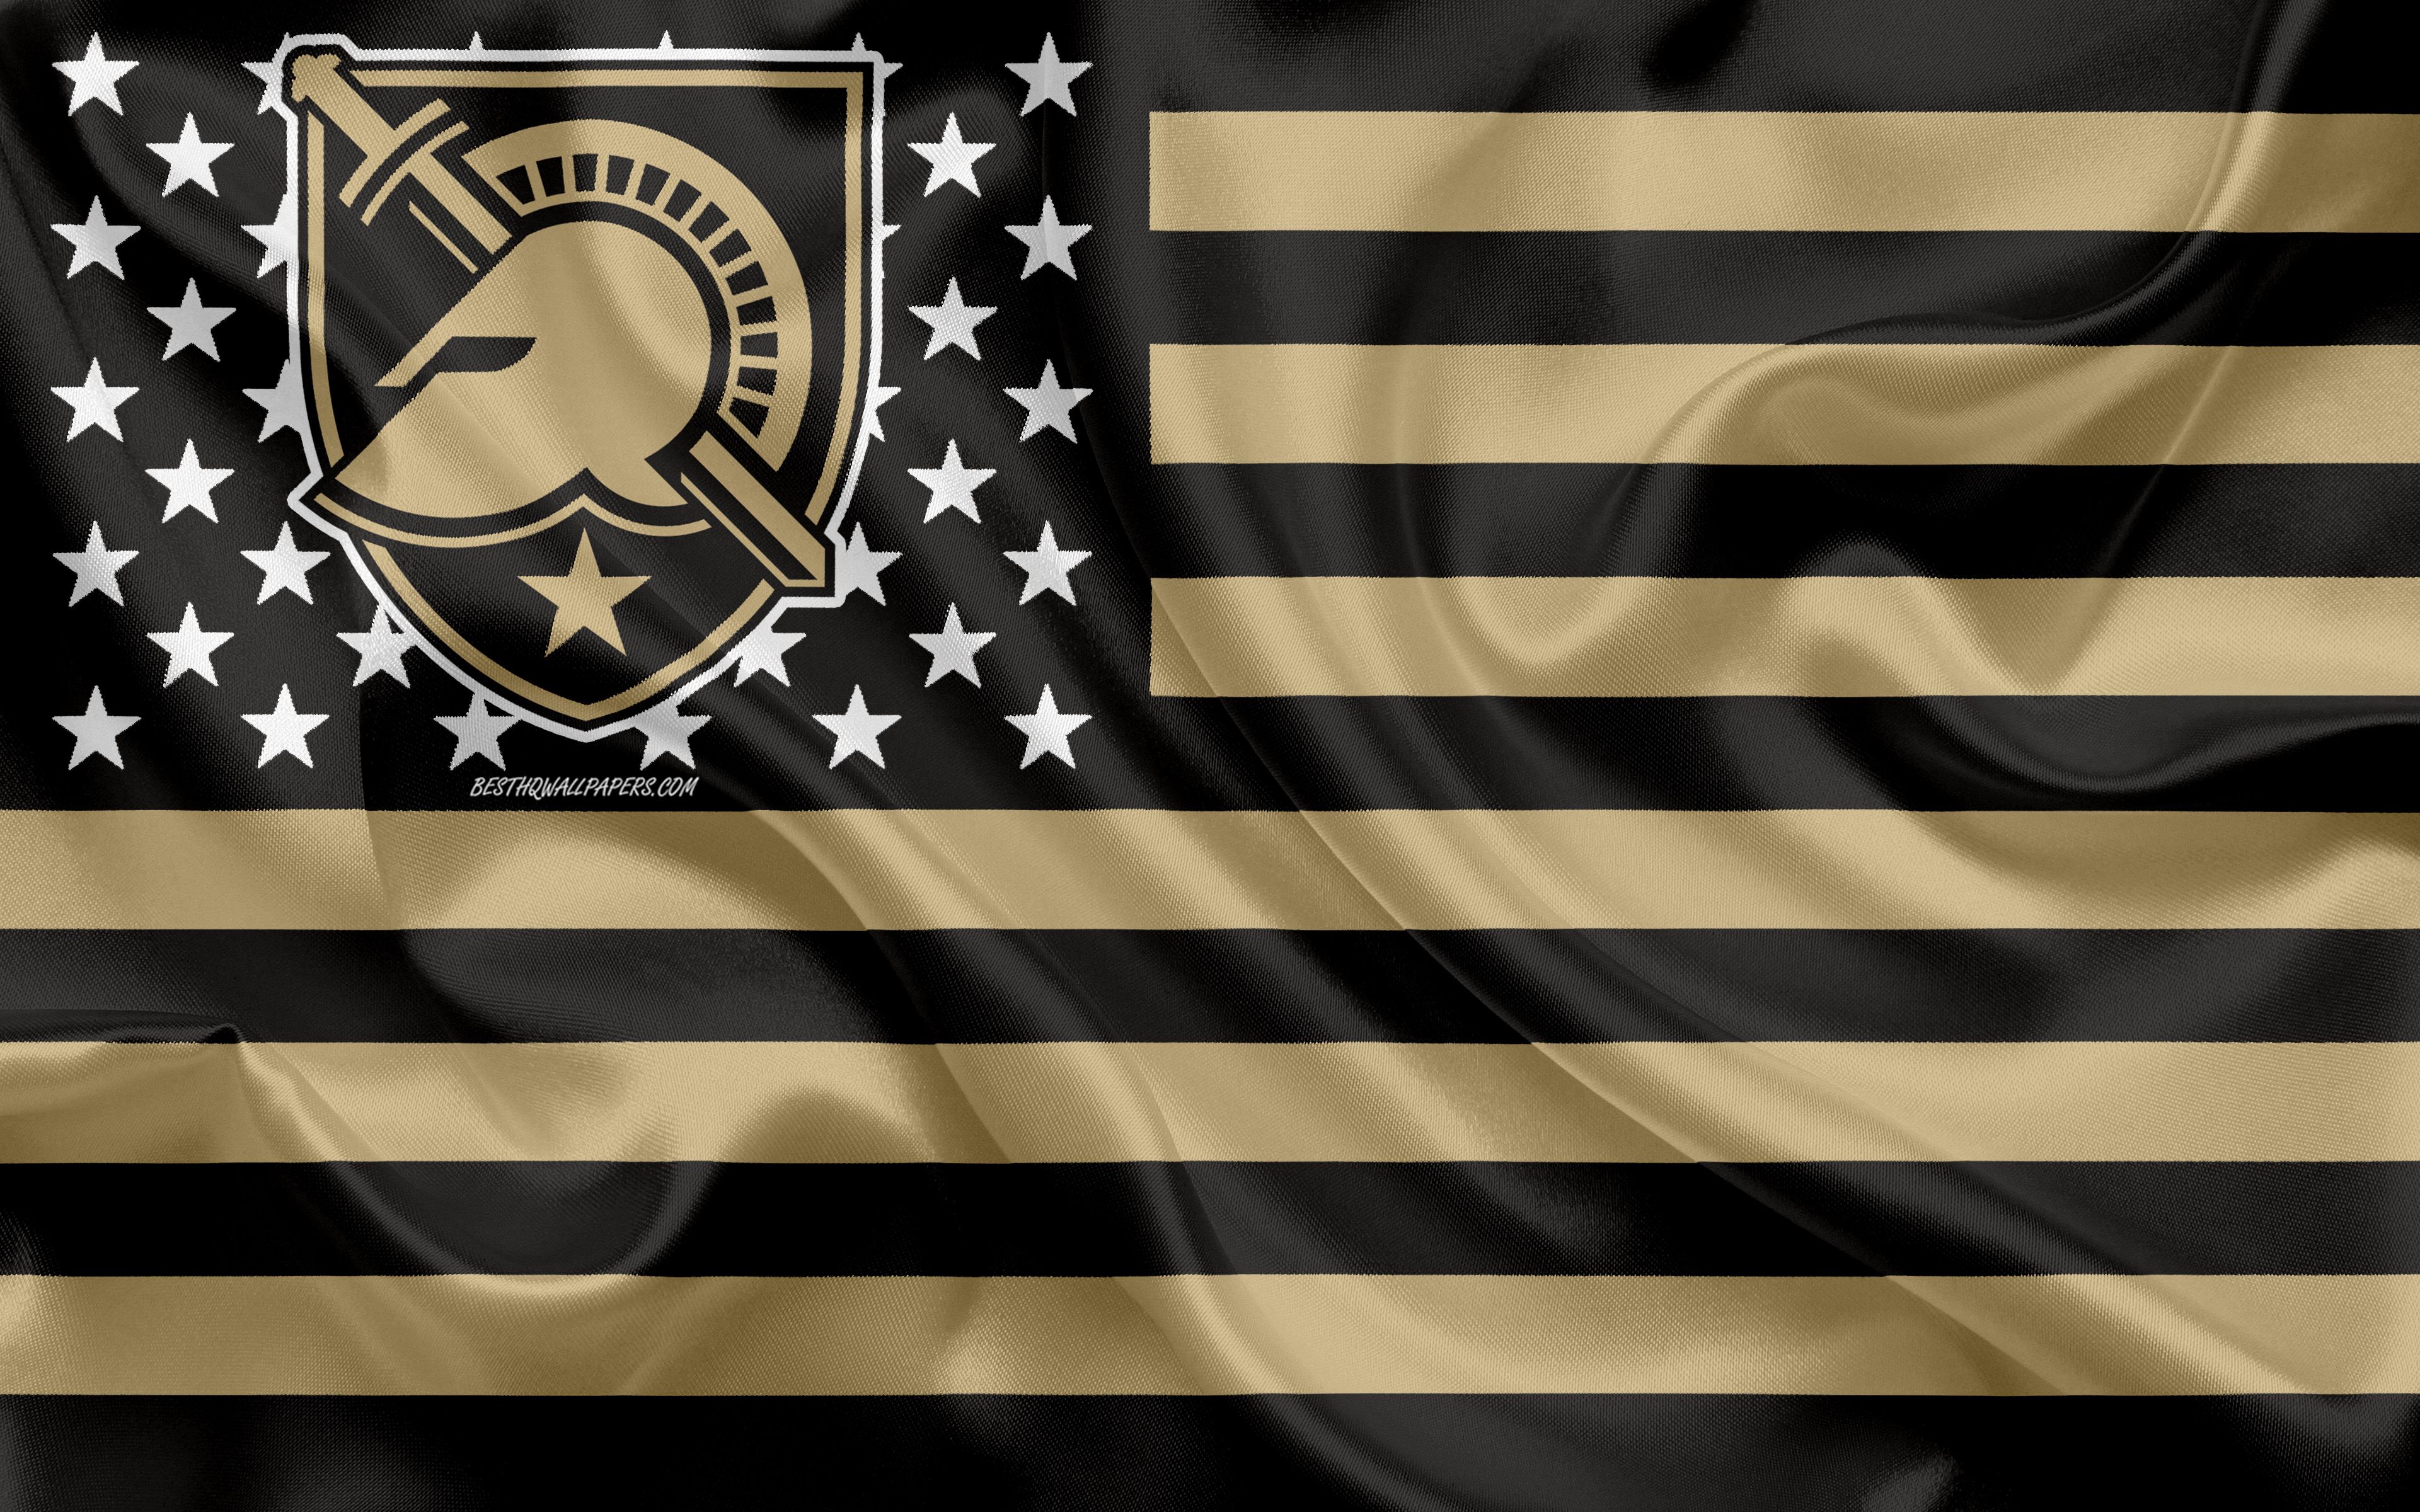 Download wallpaper Army Black Knights, American football team, creative American flag, gold black flag, NCAA, West Point, New York, USA, Army Black Knights logo, emblem, silk flag, American football for desktop with